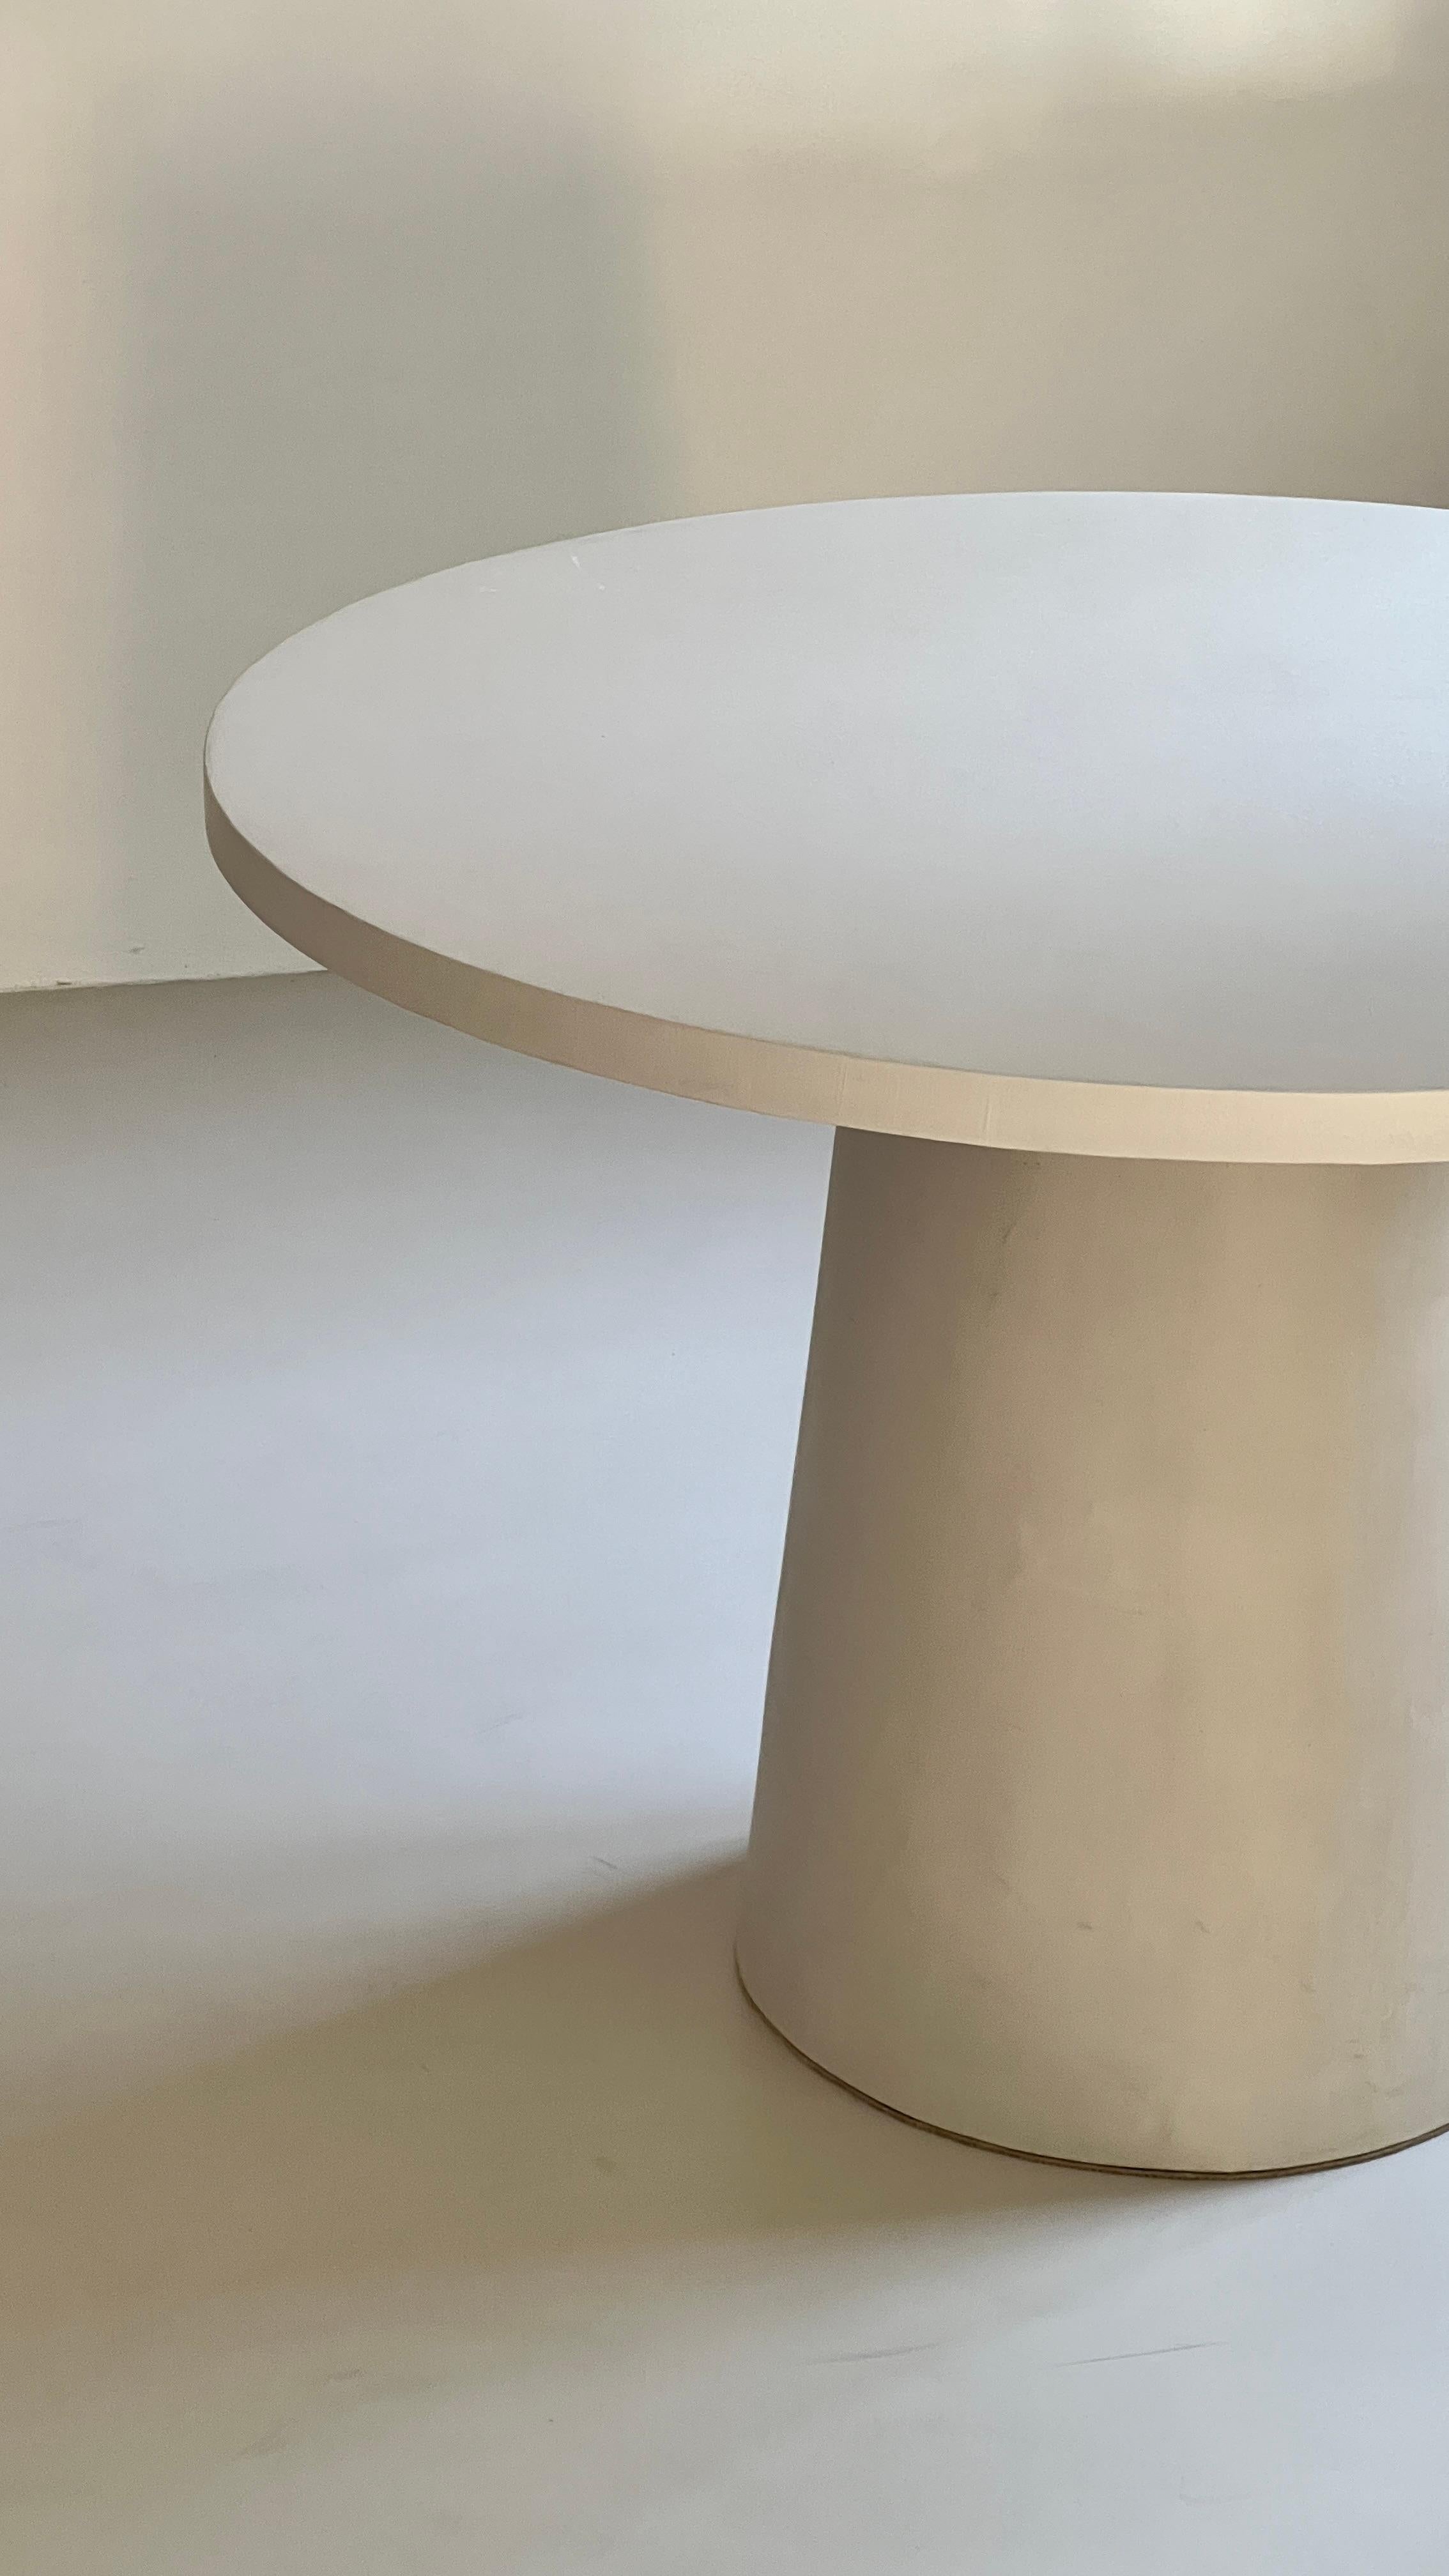 Duplex launches CORDA, a table collection hand molded resin by local artisans to create an elegant, versatile round table.

Diameter 110cm Height 78cm
Customizable in color and diameter

Lead time 3-4 weeks + shipping


